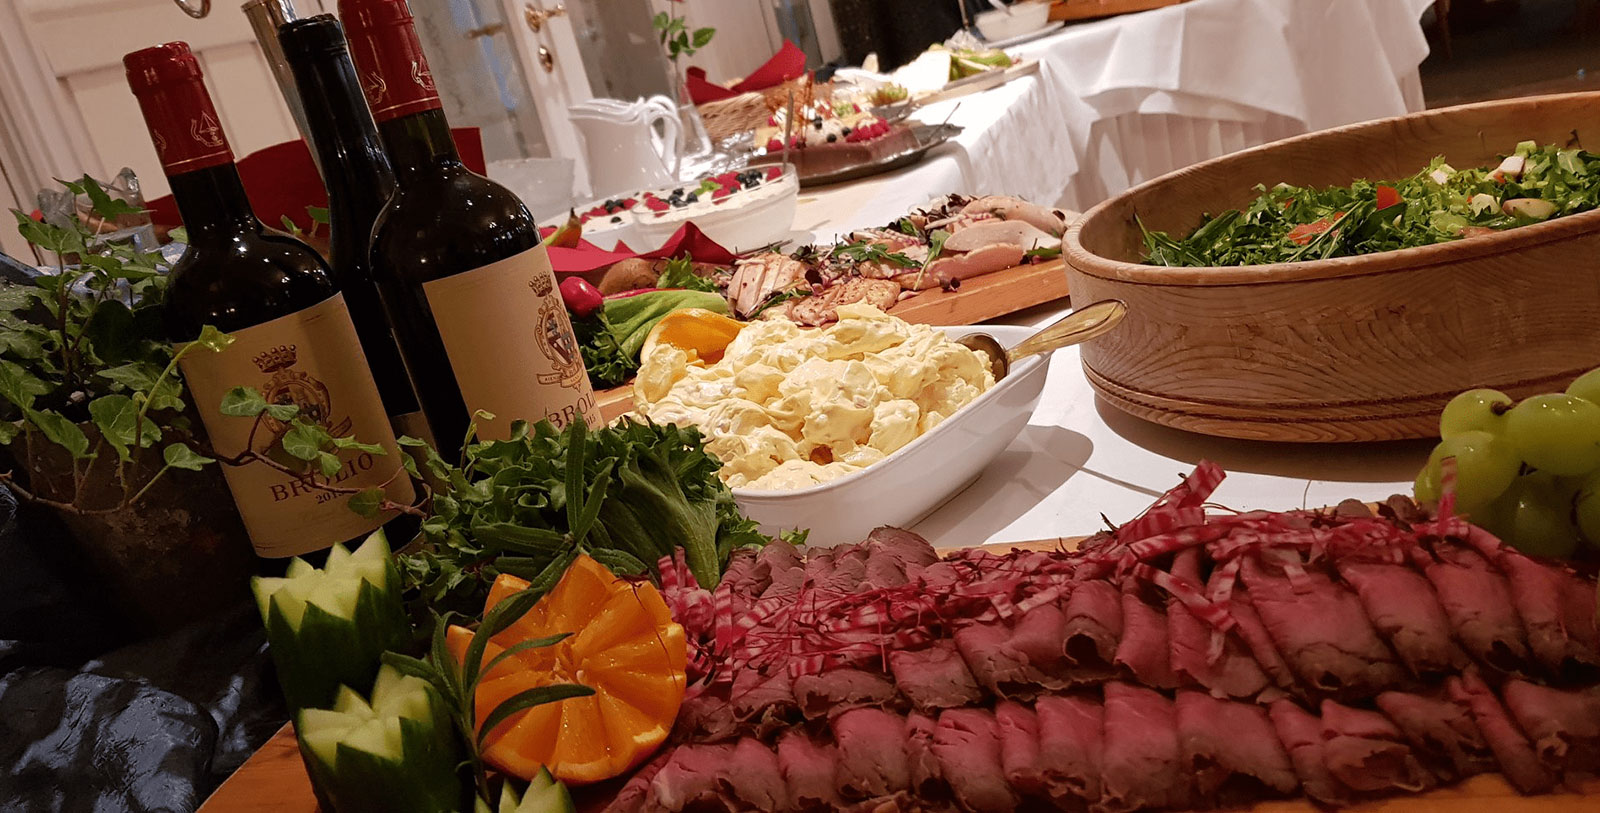 Taste a delicious array of Norwegian delicacies at the hotel's restaurant.